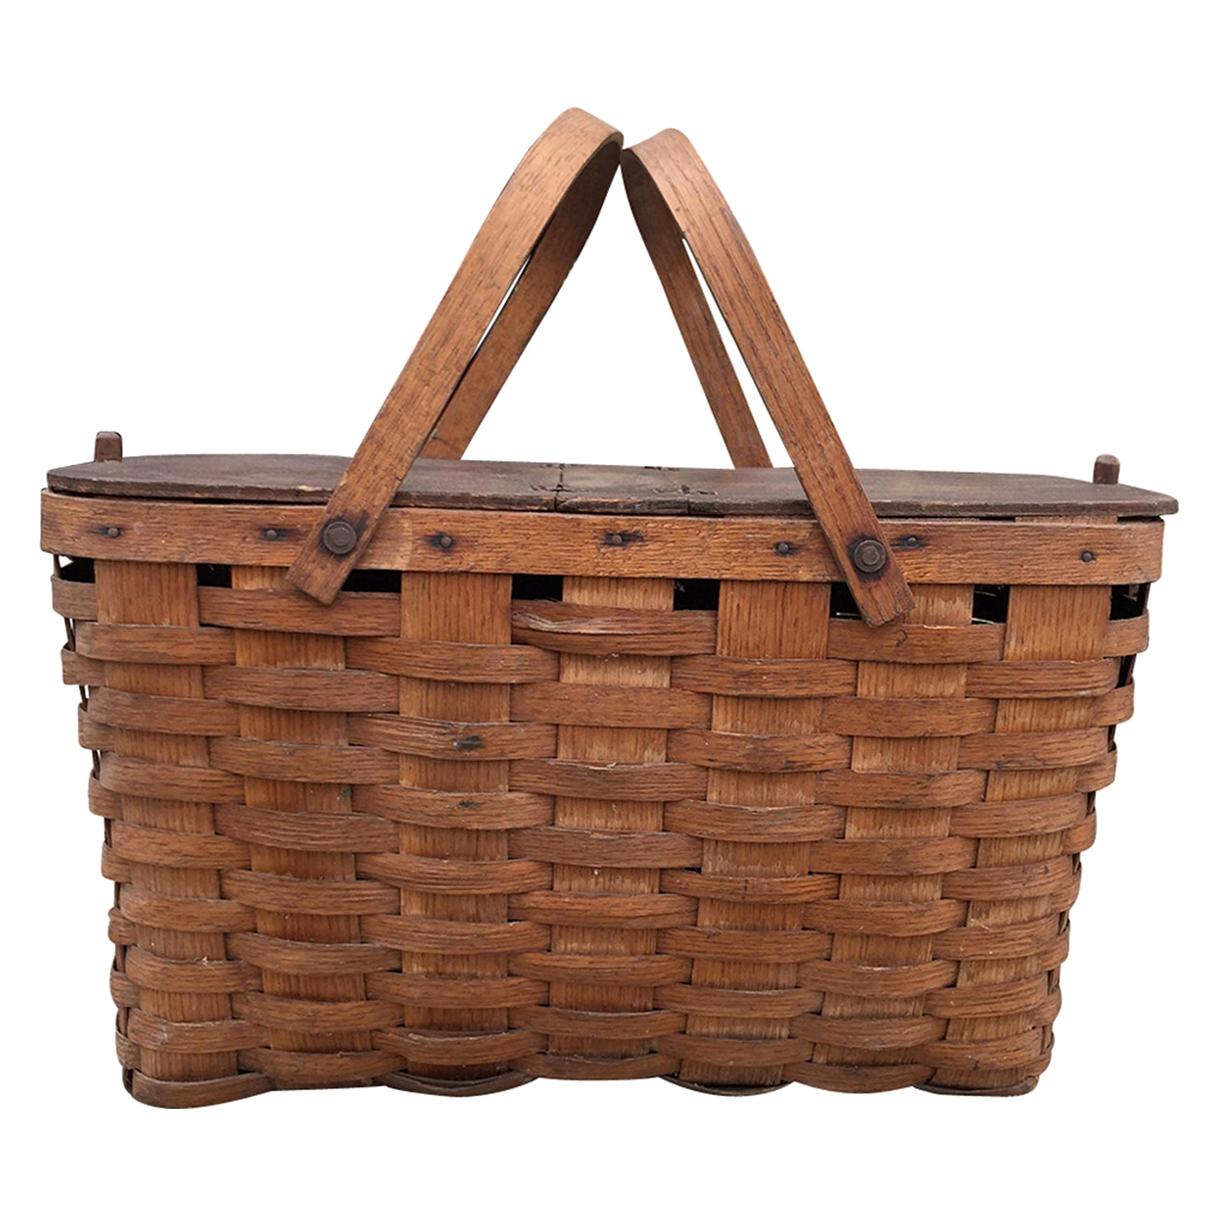 Early 20th Century American Picnic Basket